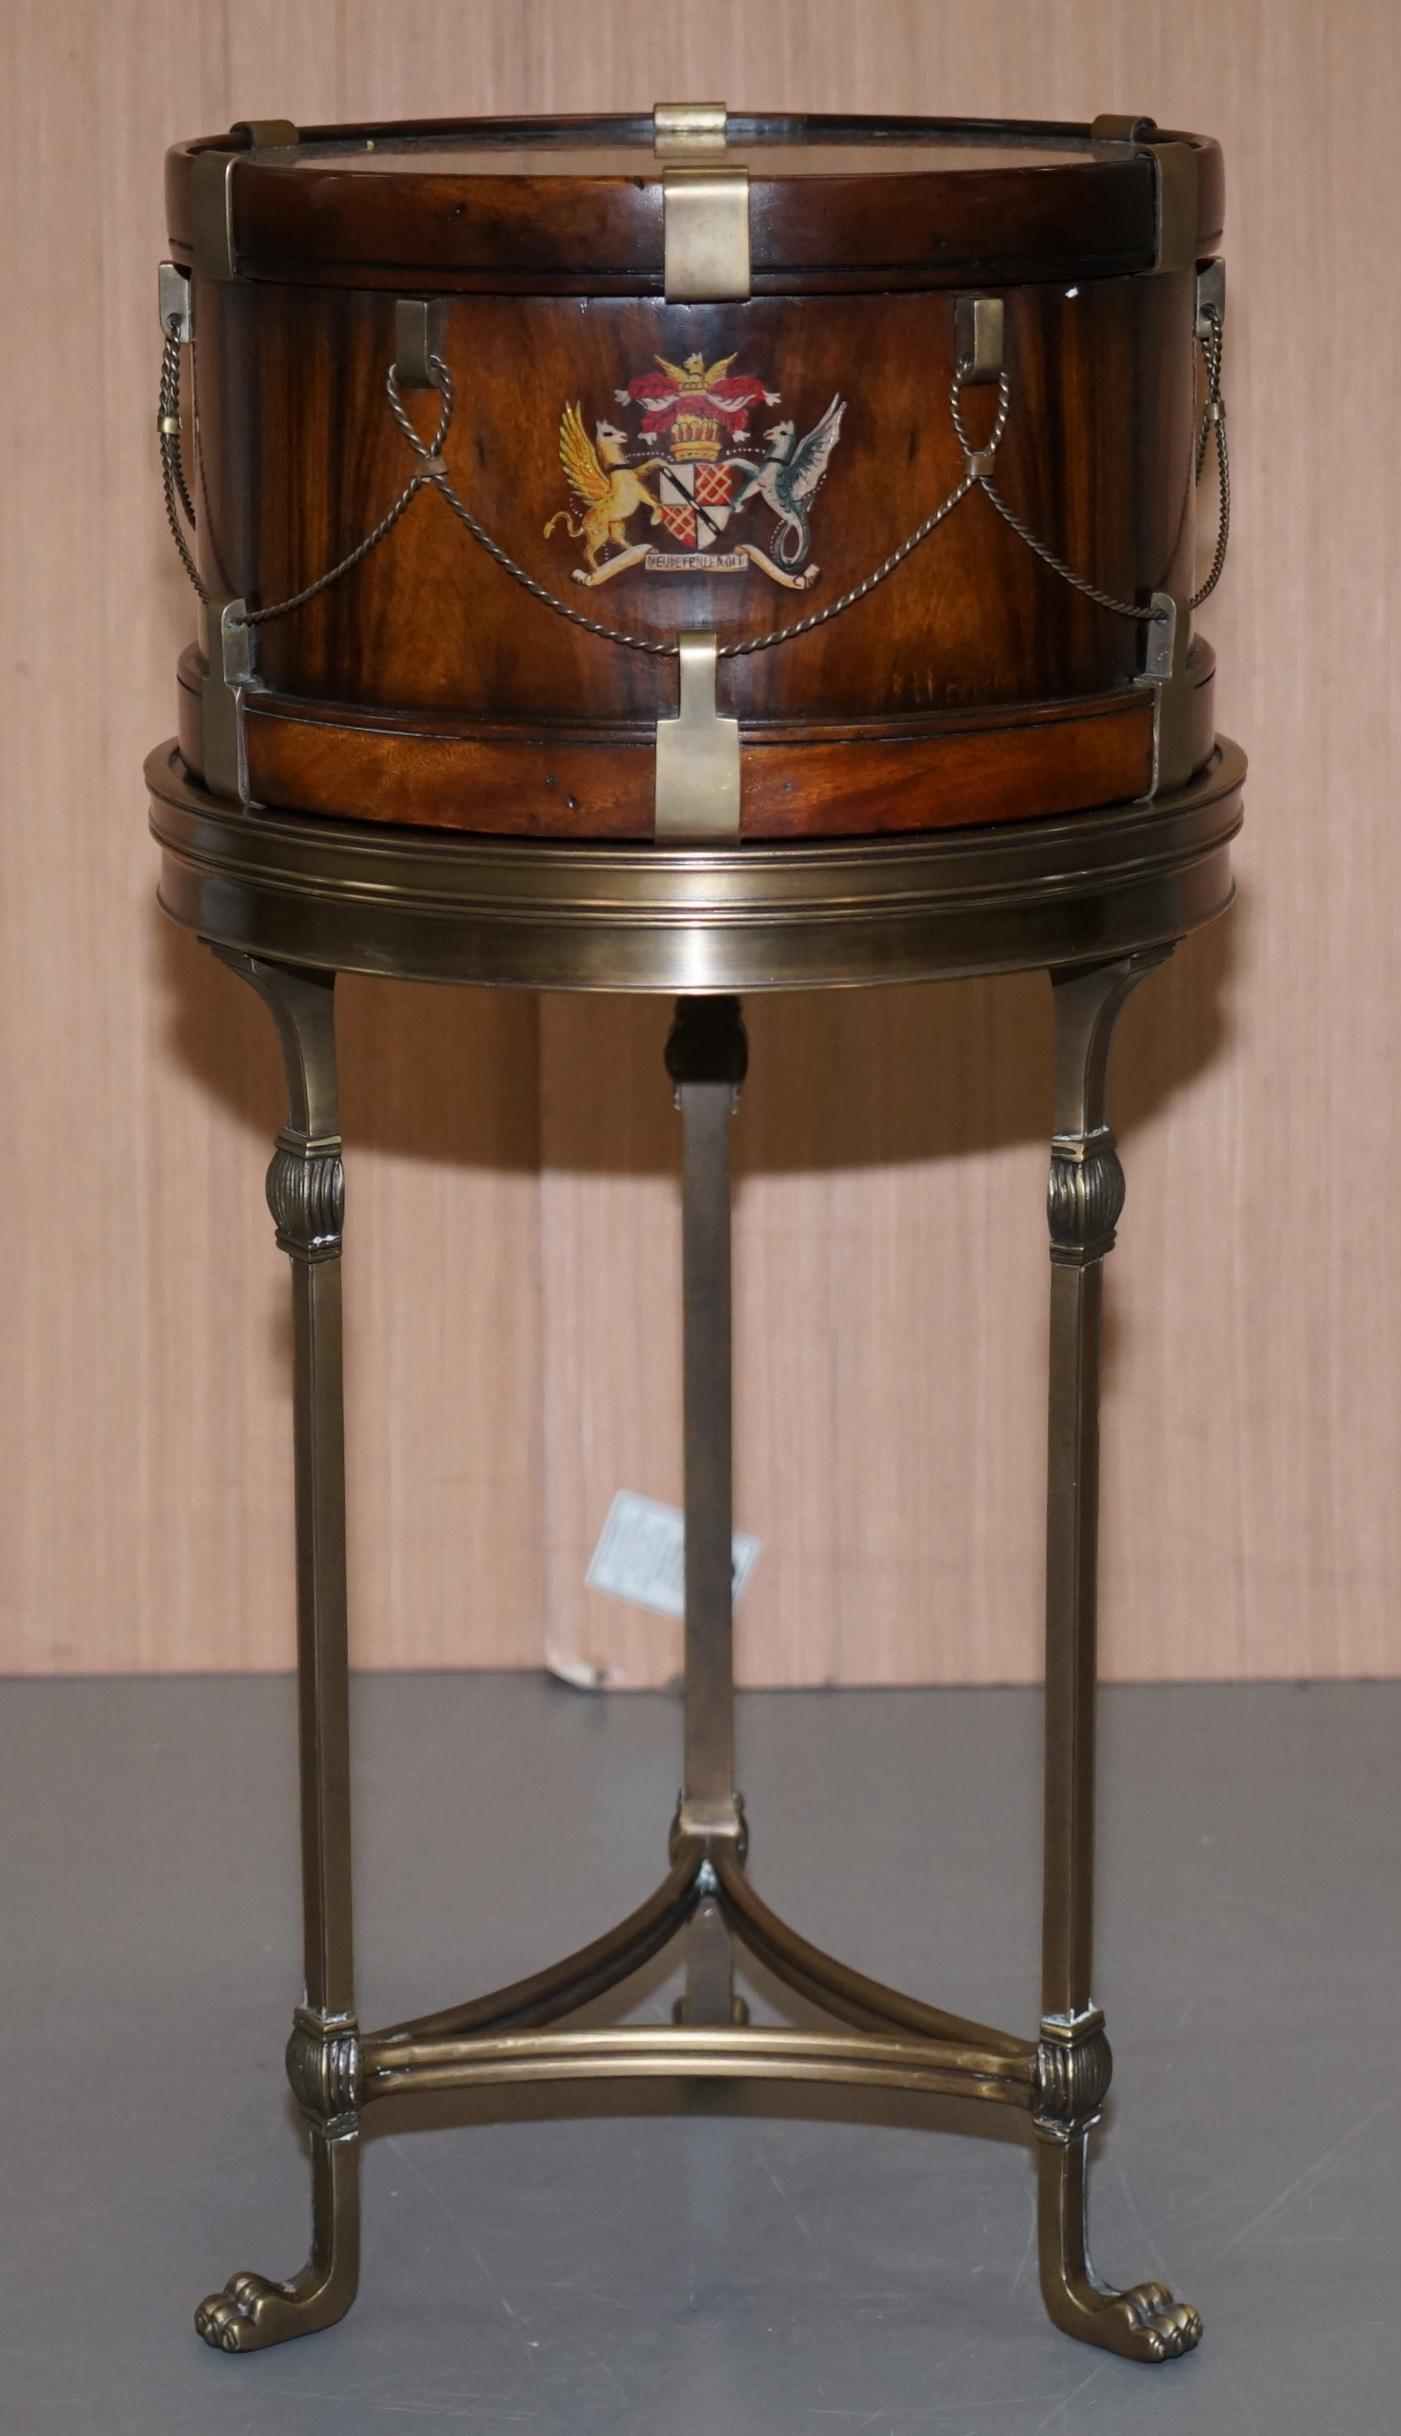 Regency Stunning Little Side Table with Hand Painted Armorial Crests in the Form of Drum